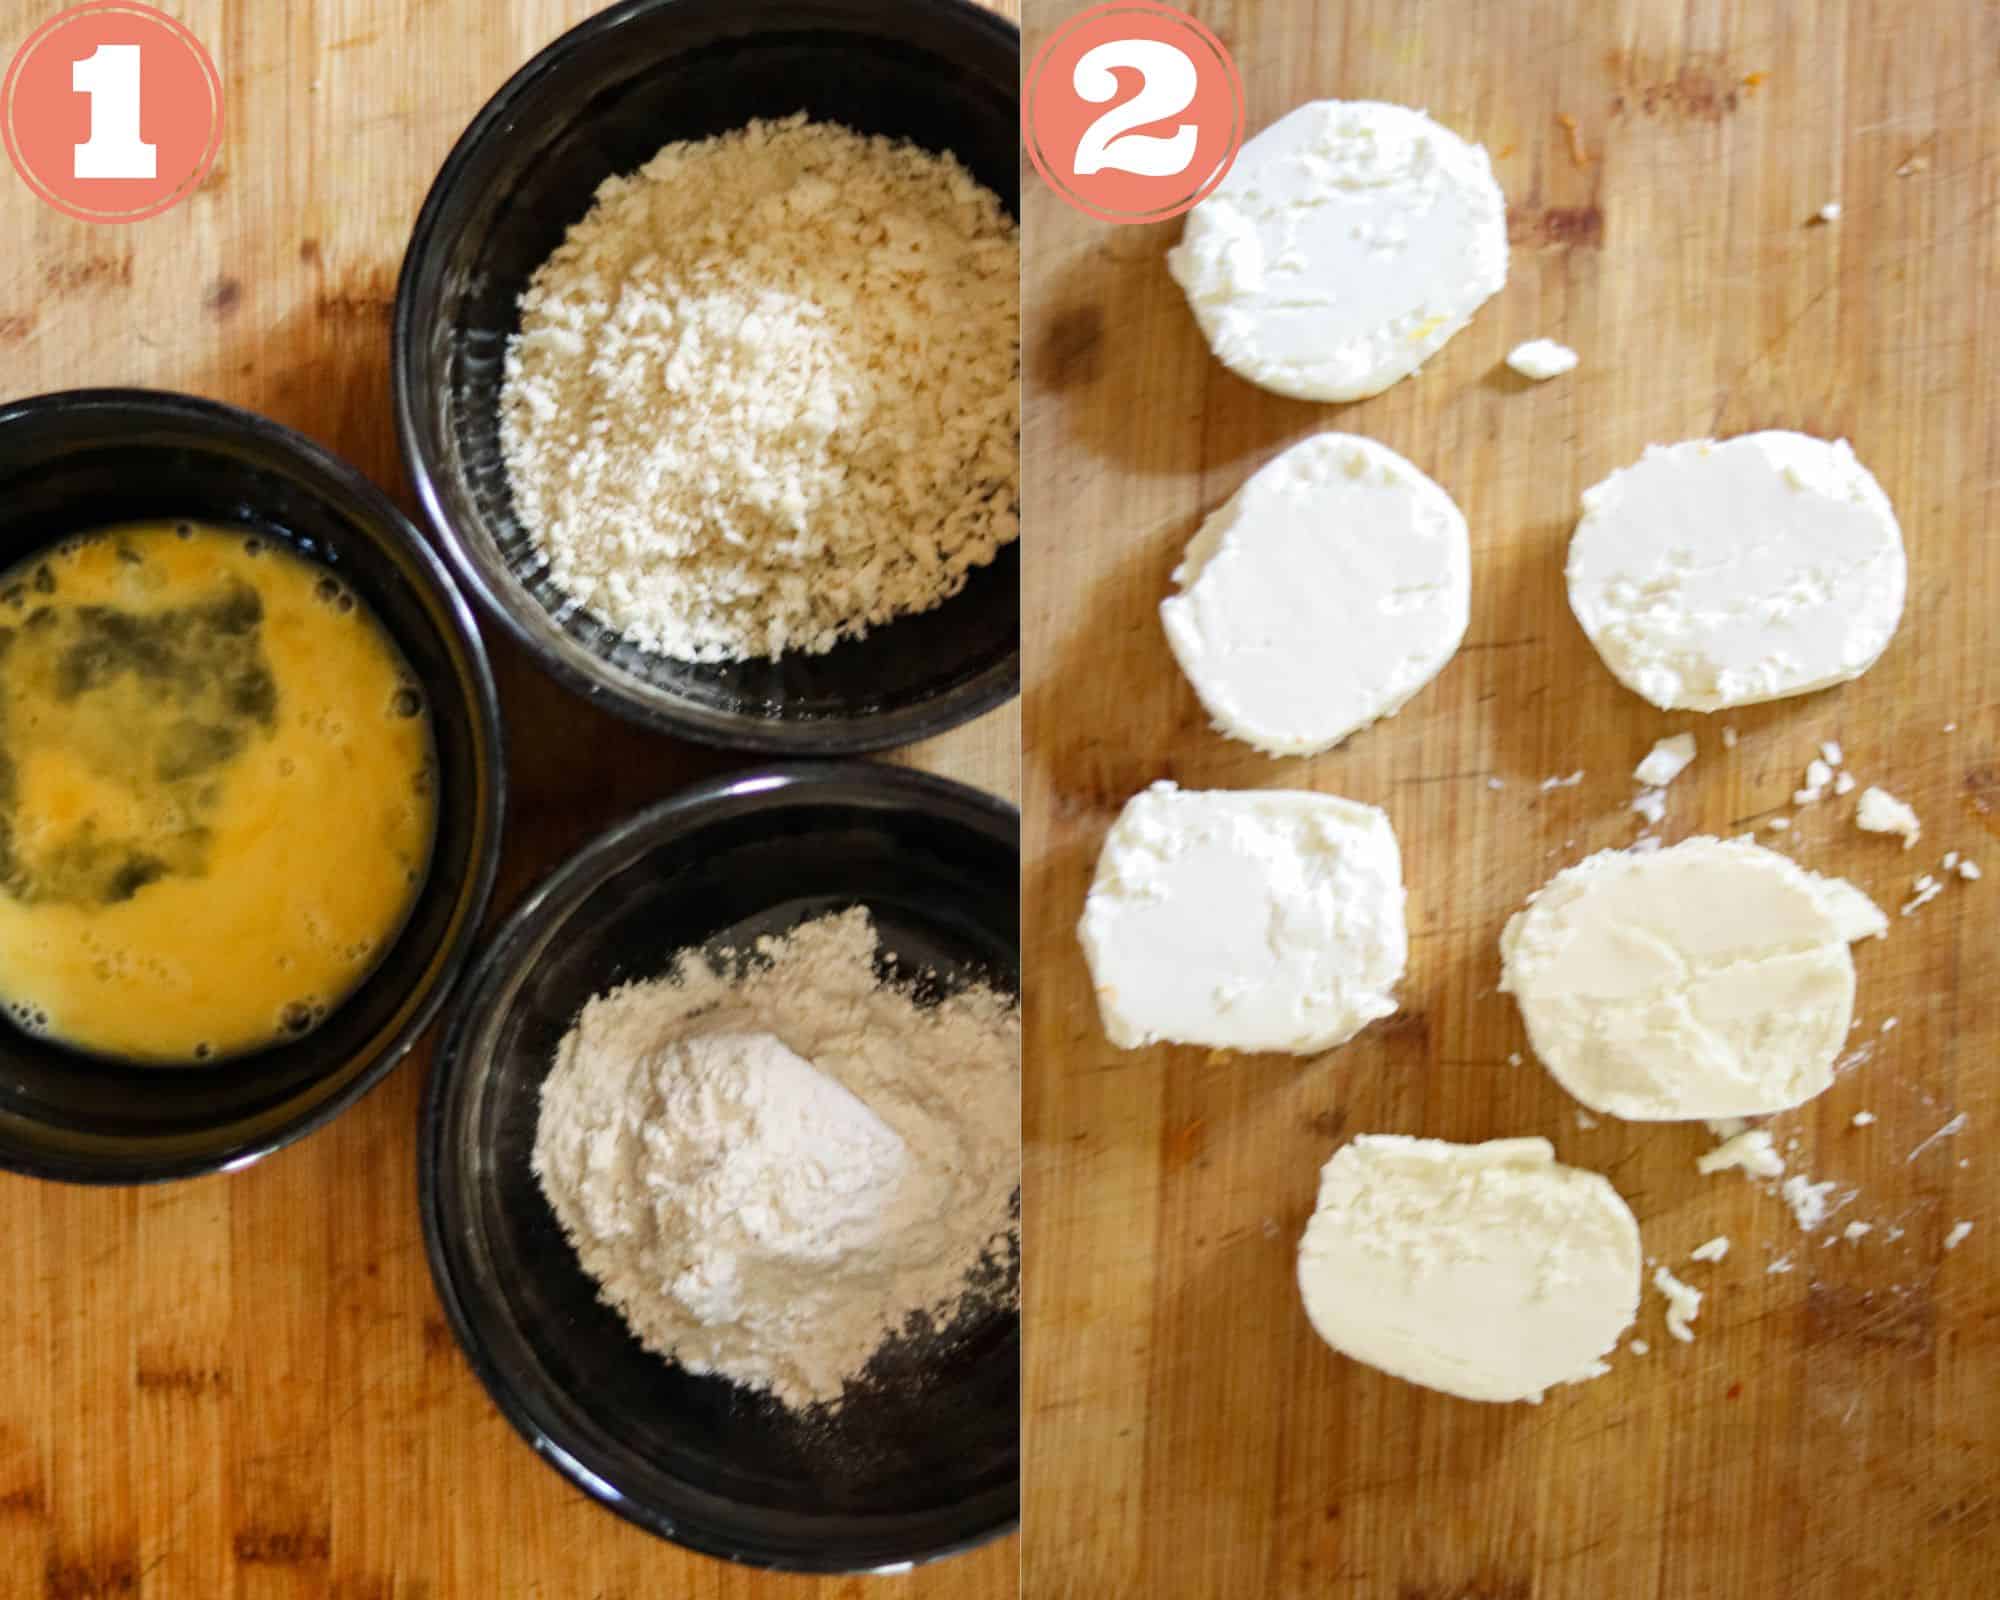 photos side by side of breading ingredients and slices of goat cheese.